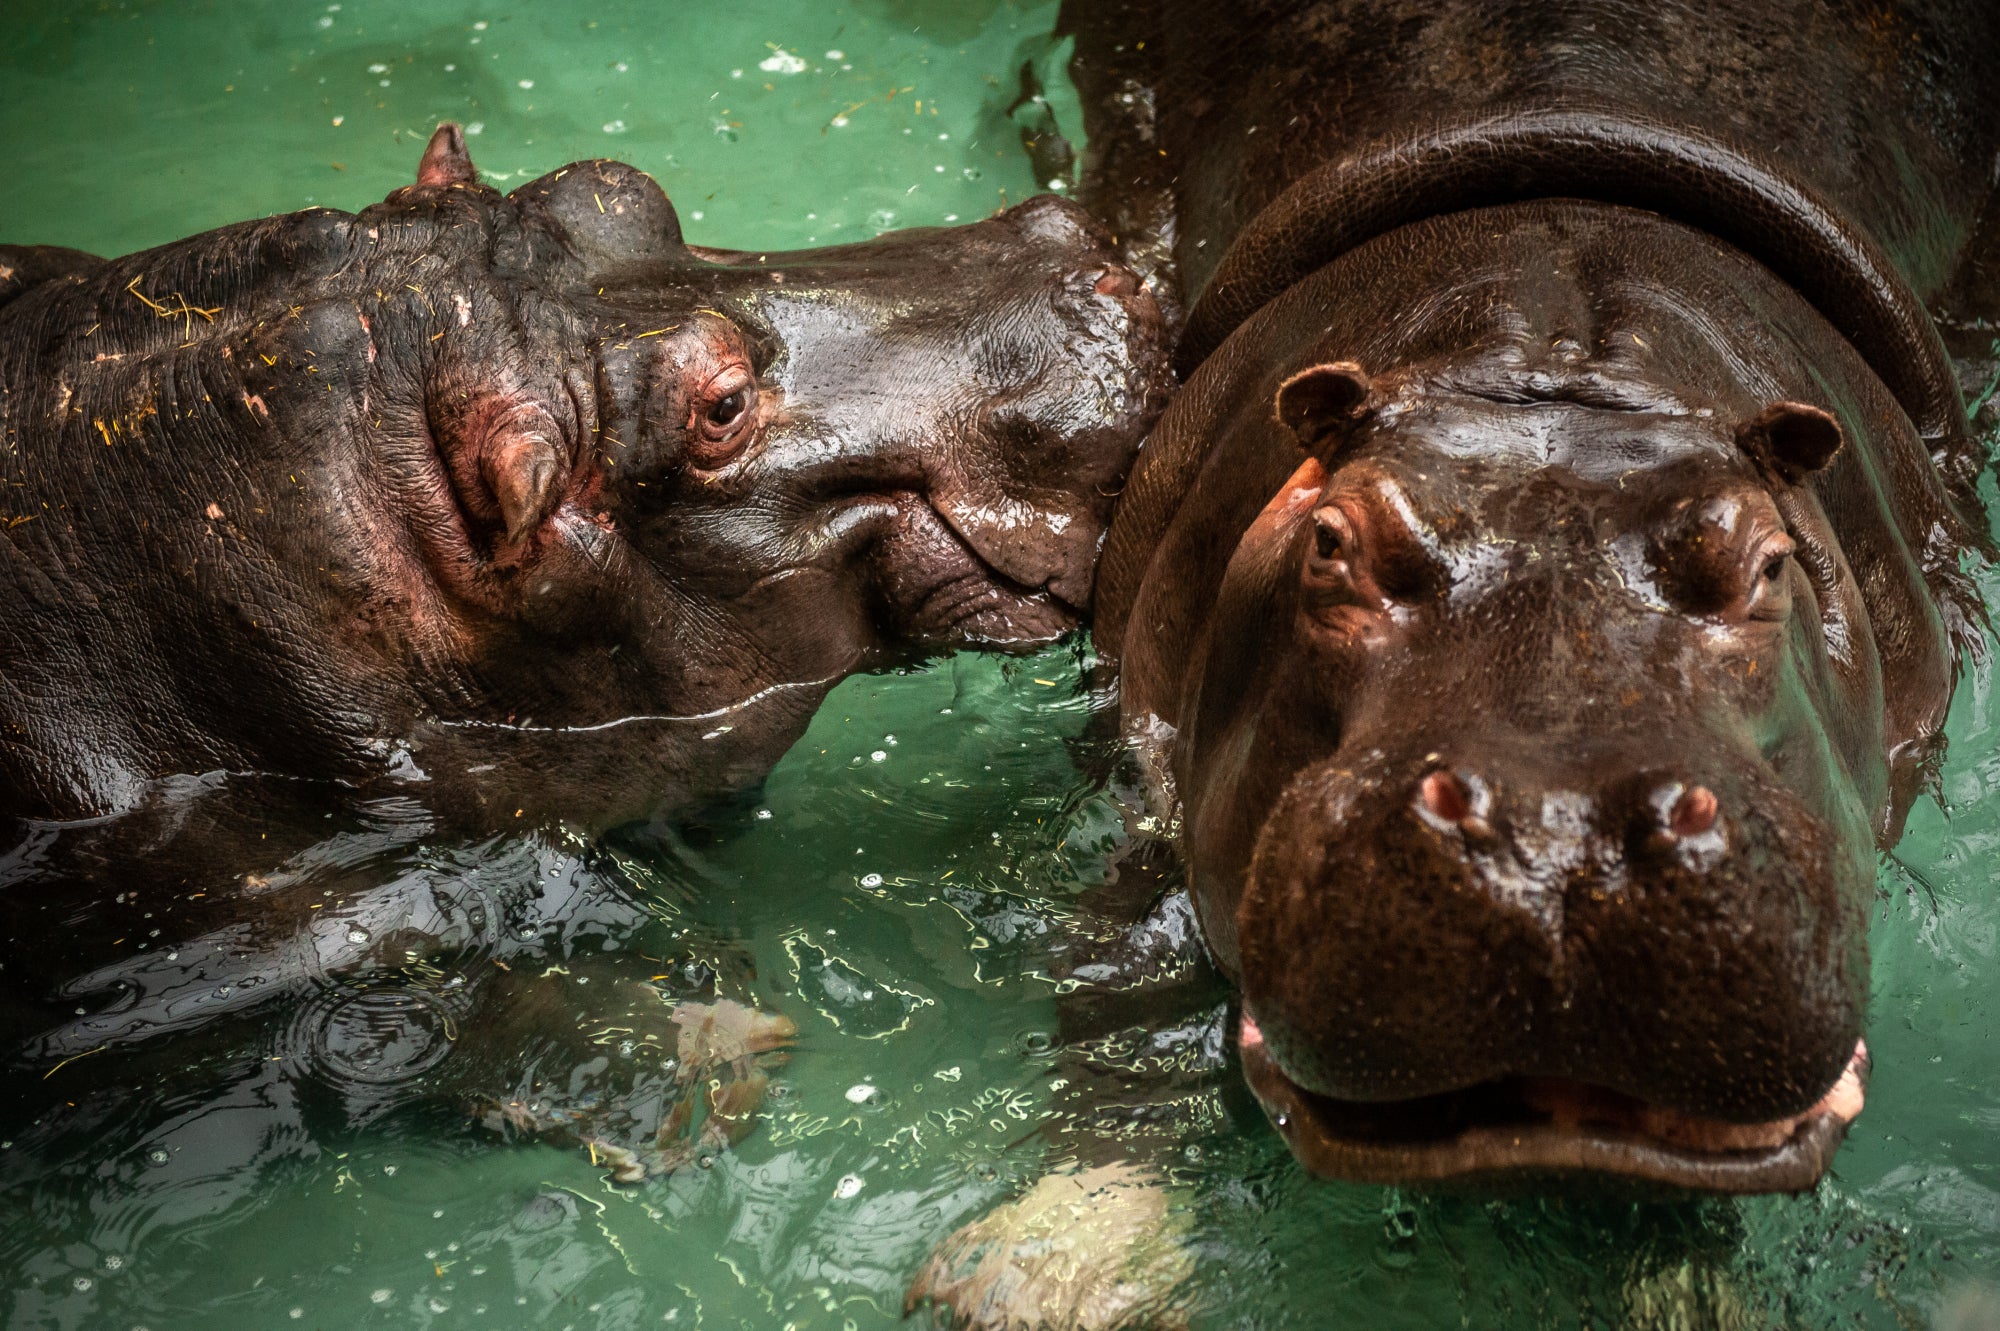 Hippos Imani, 14 and Hermien, 41 at the Antwerp Zoo in Belgium have tested positive for Covid-19